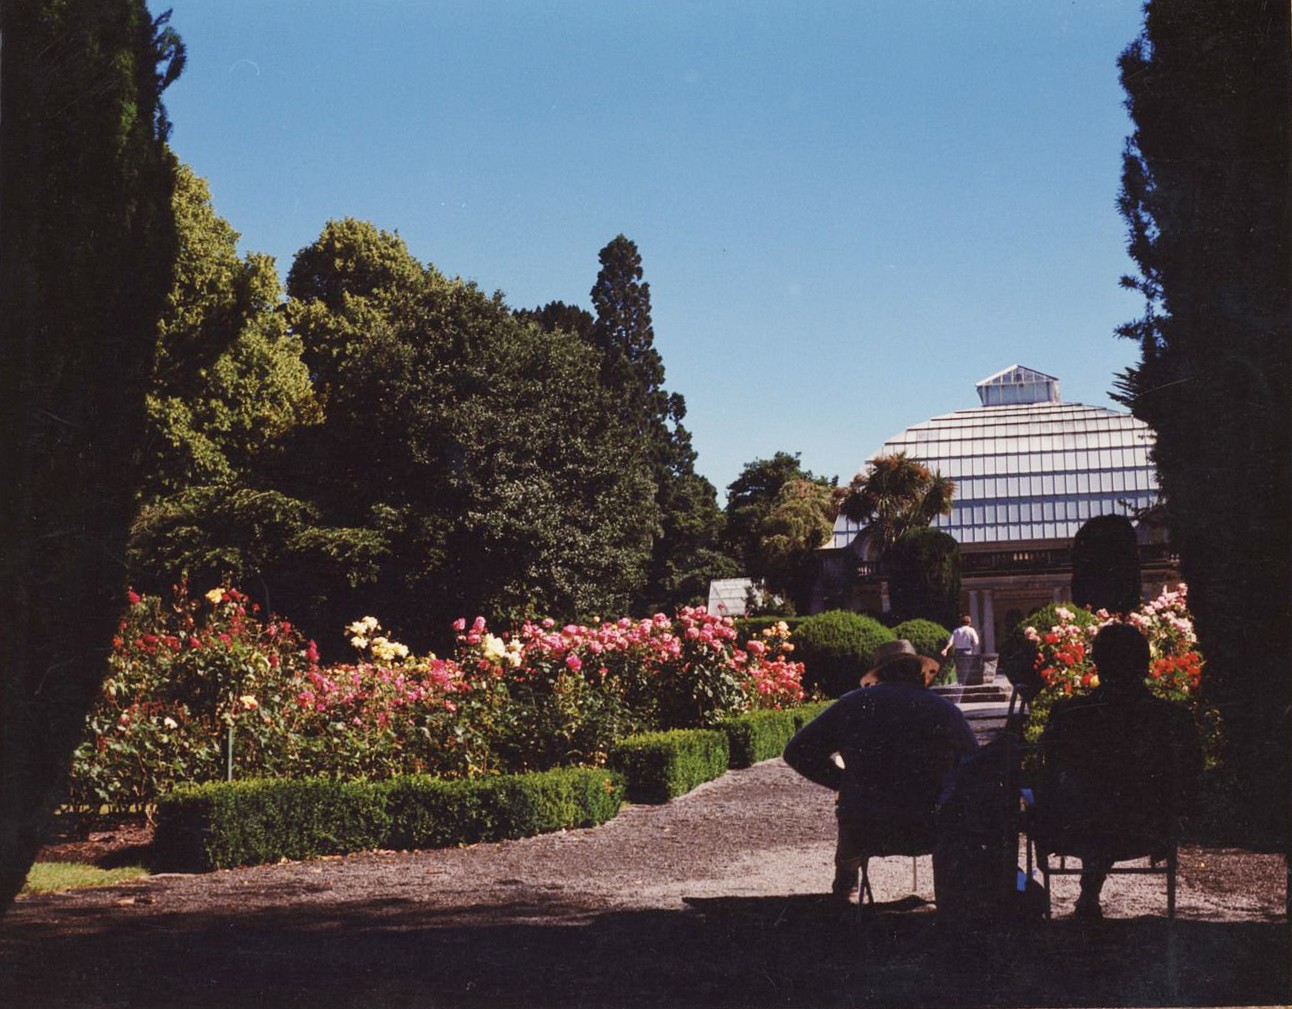 A view of the Christchurch rose gardens with a greenhouse in the background and a crisp blue sky. Two men in shadow sit in the foreground.